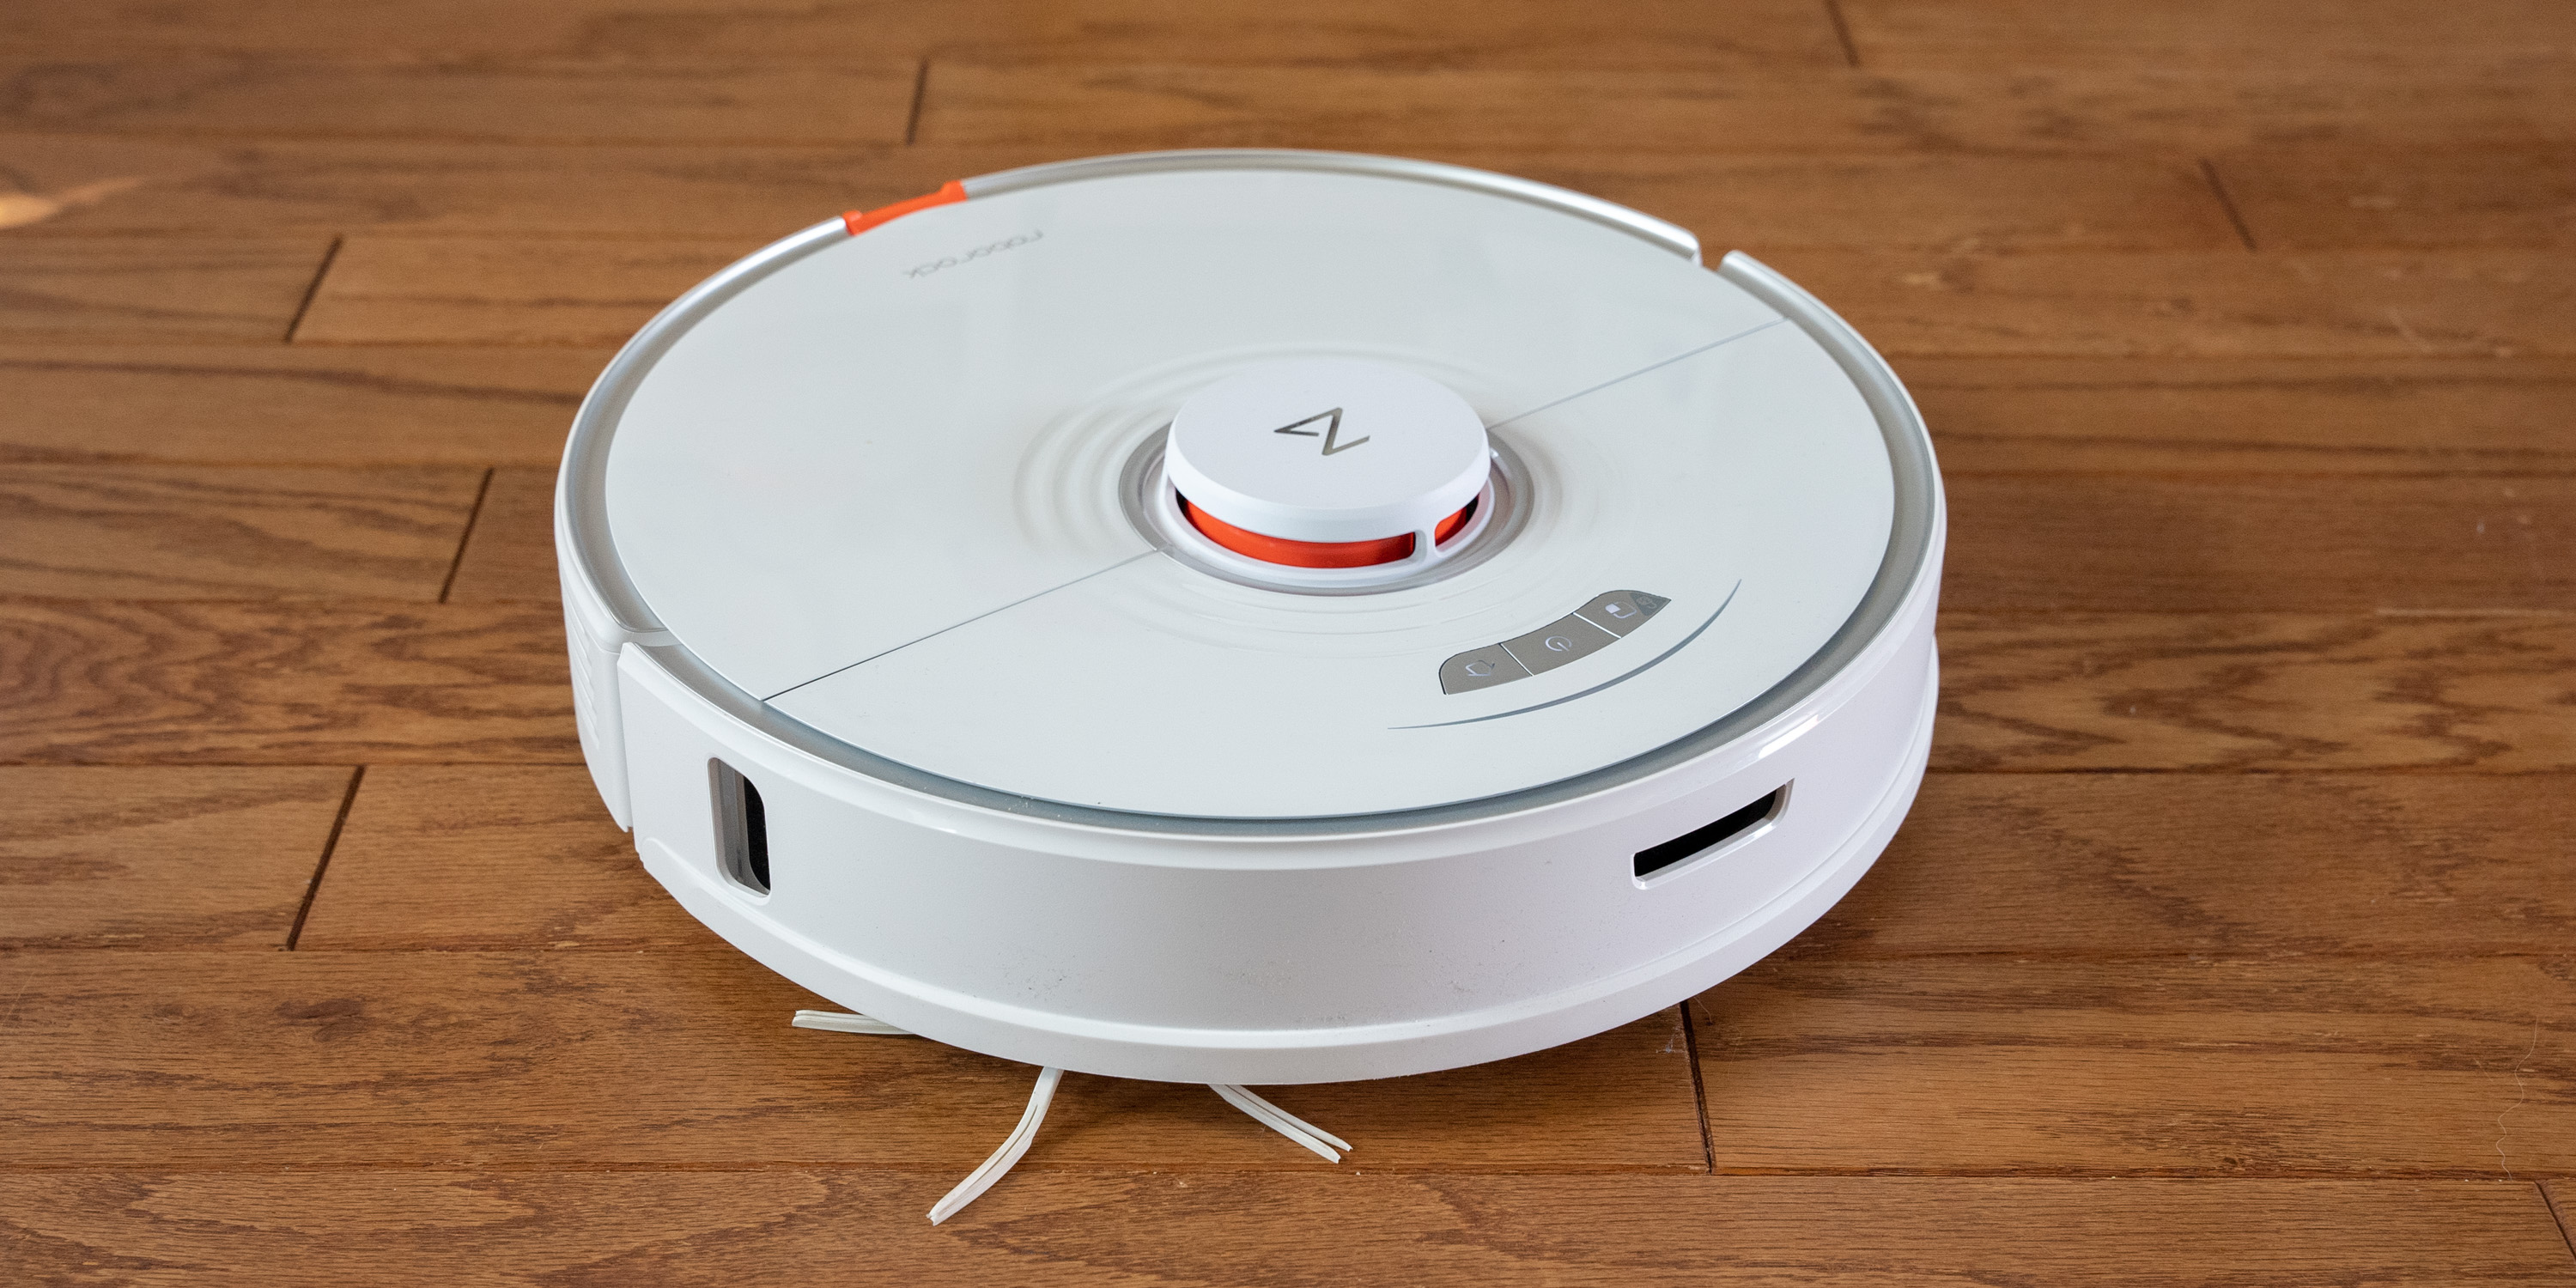 Hands-on: Roborock S7 robot vacuum brings next-level mopping and mapping [Video]